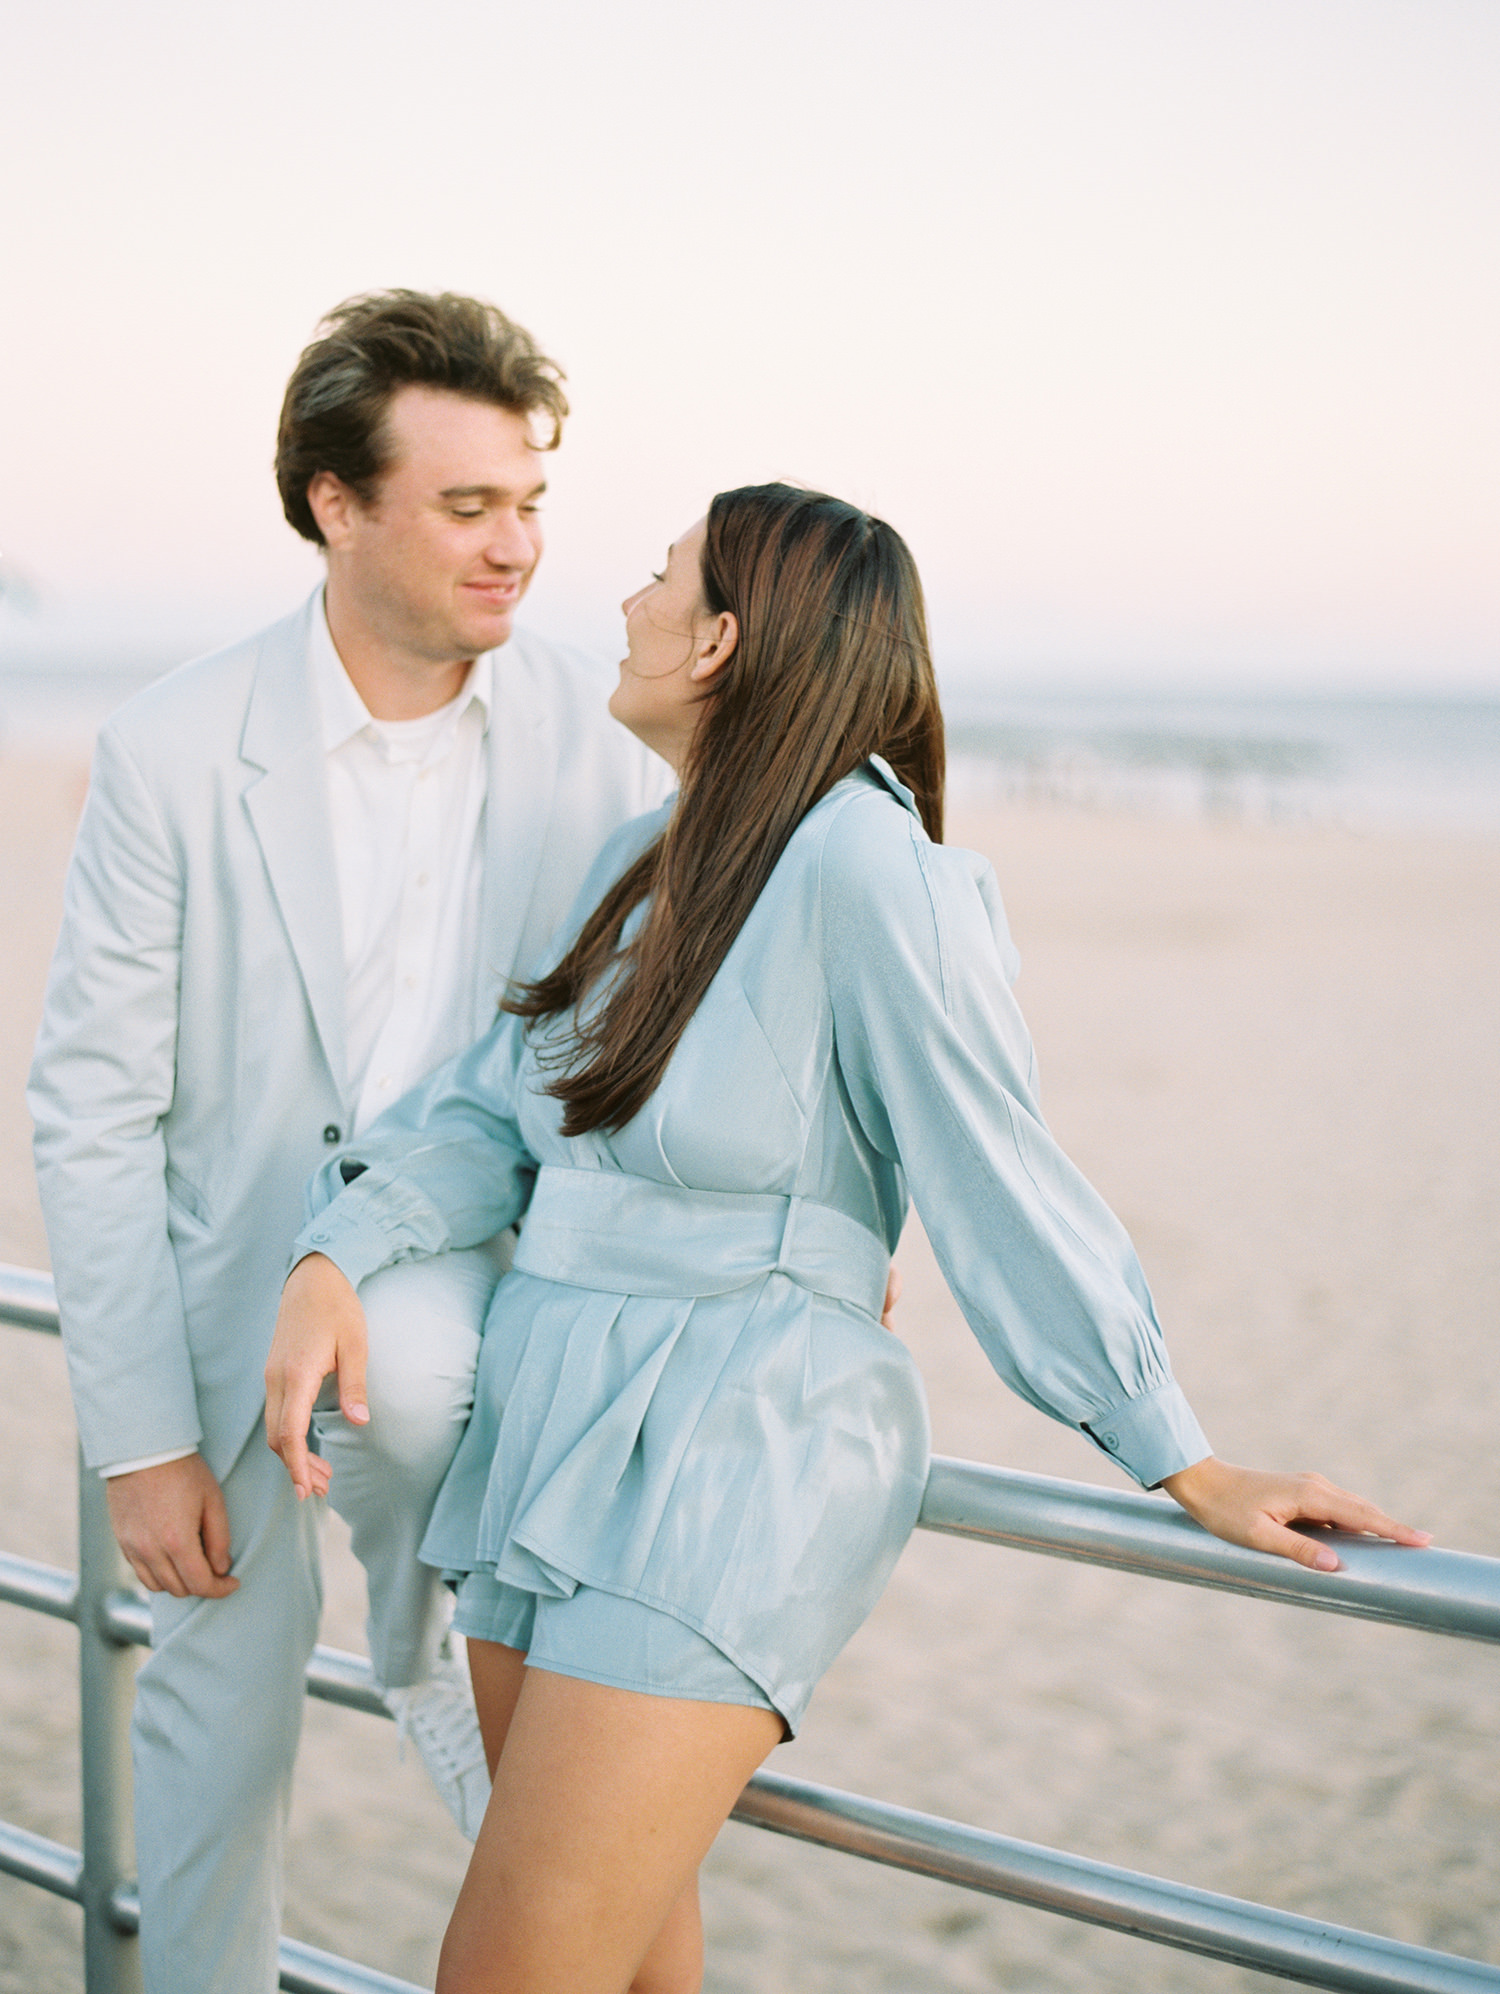 Coney Island Engagement Photo Portrait in front of beach